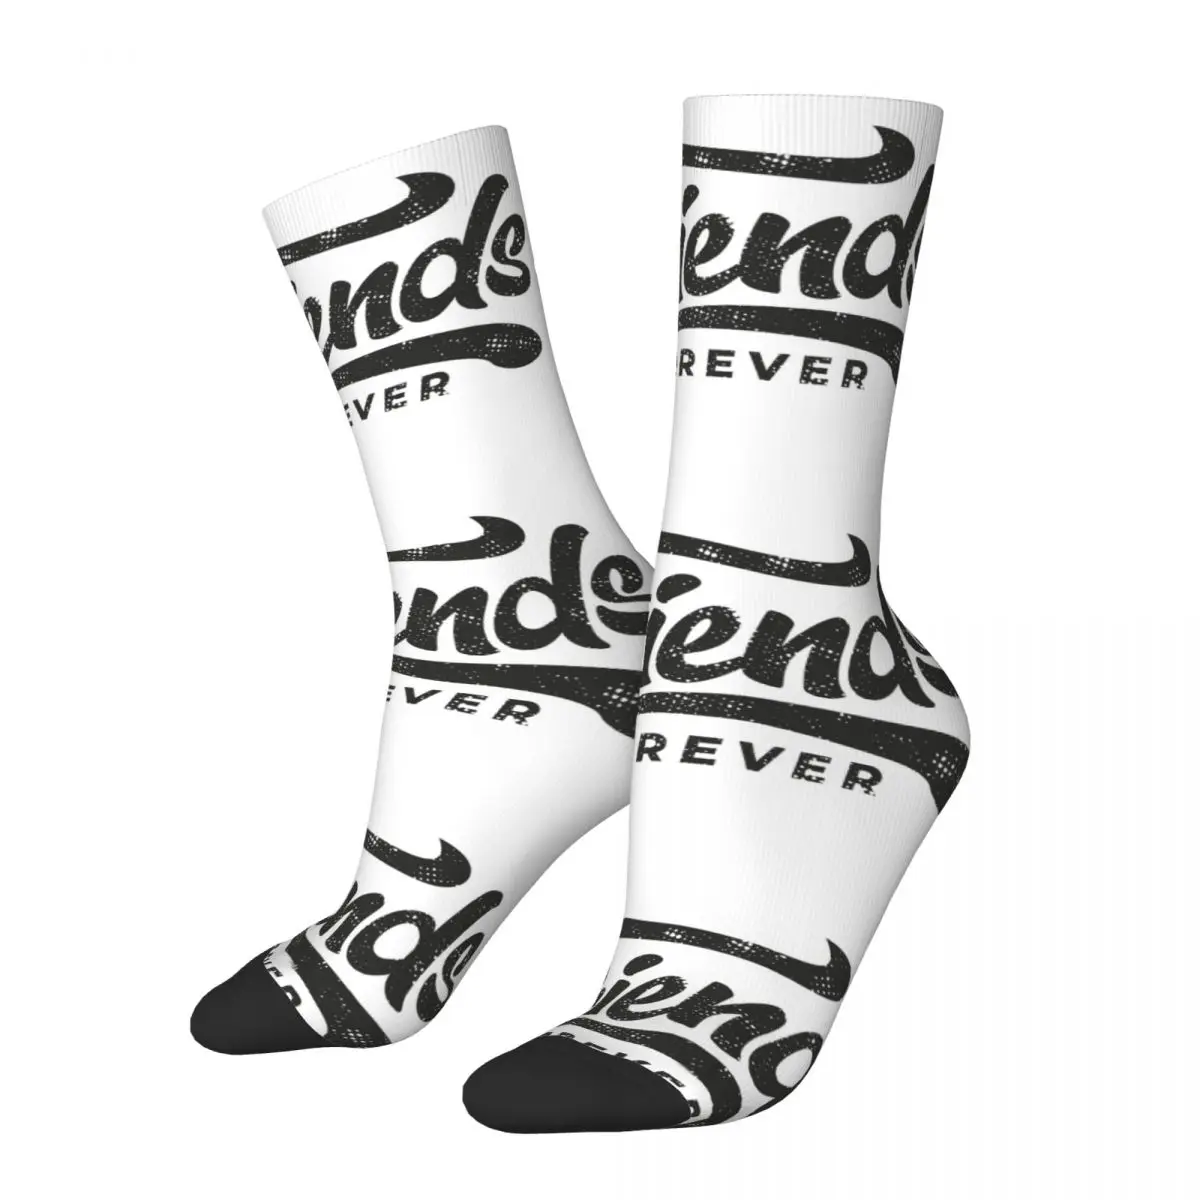 

Good Friends Are Forever Friends TV Play Socks Male Mens Women Winter Stockings Printed